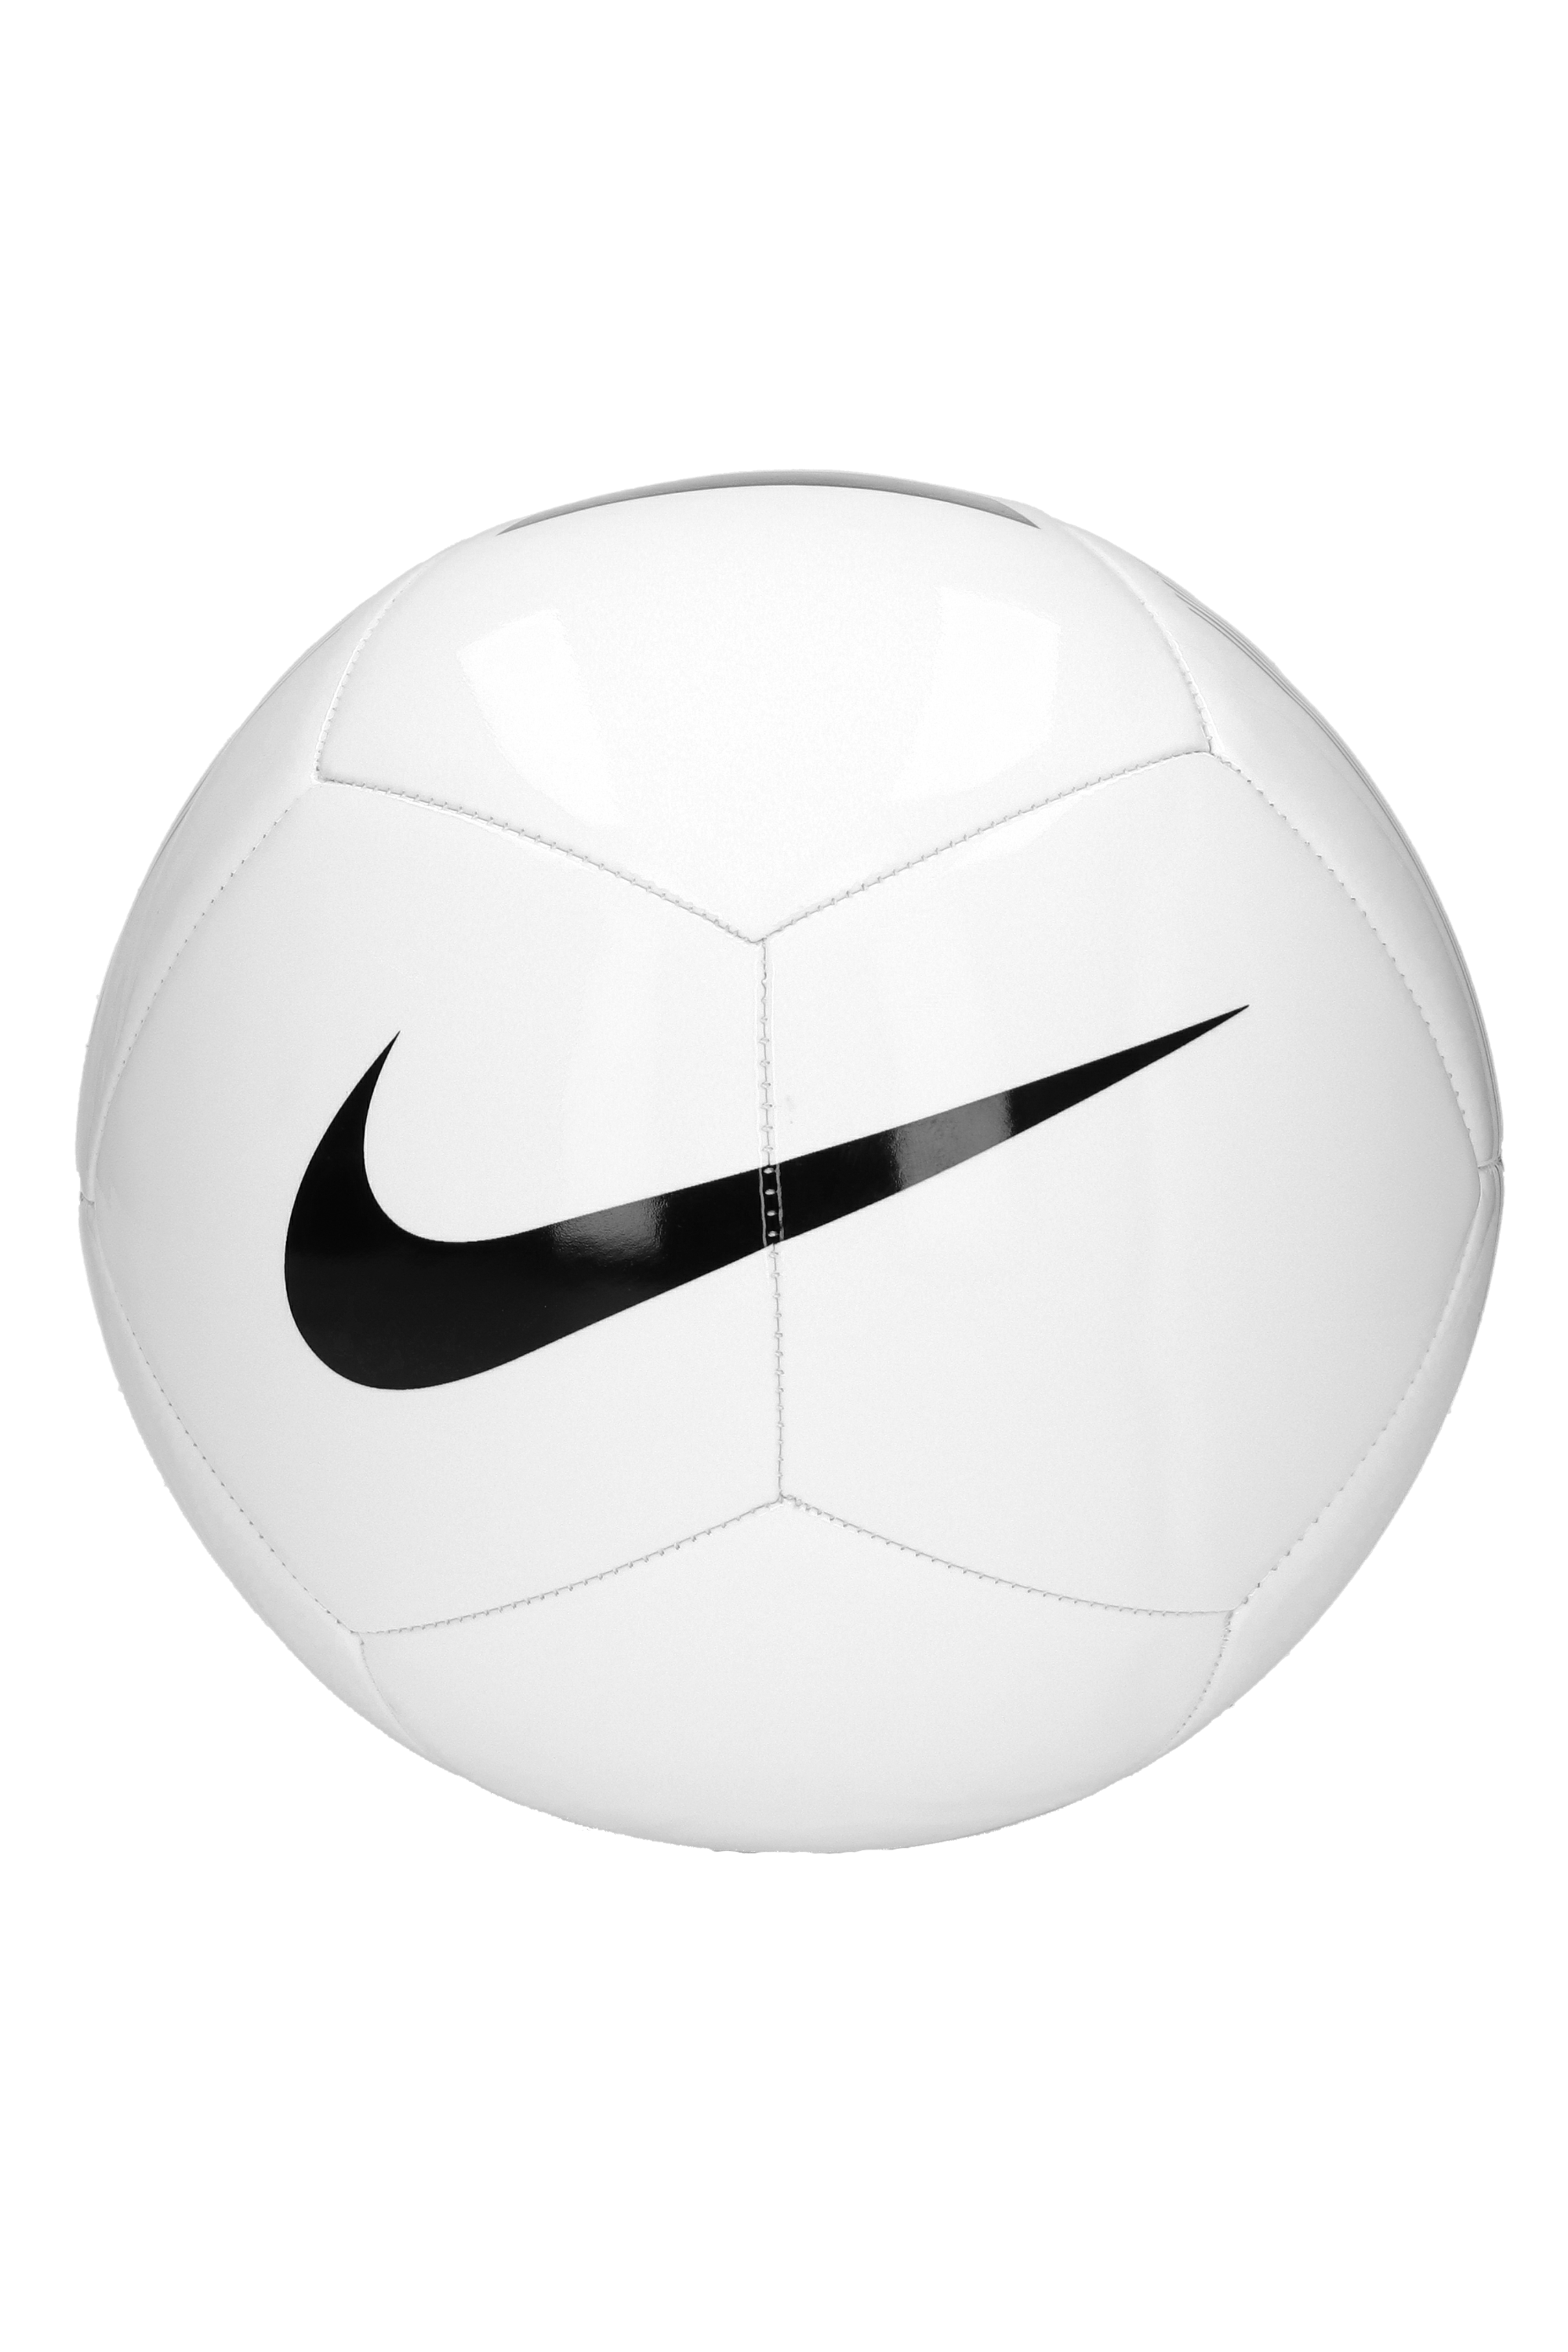 Ball Nike Pitch Team Size | vlr.eng.br